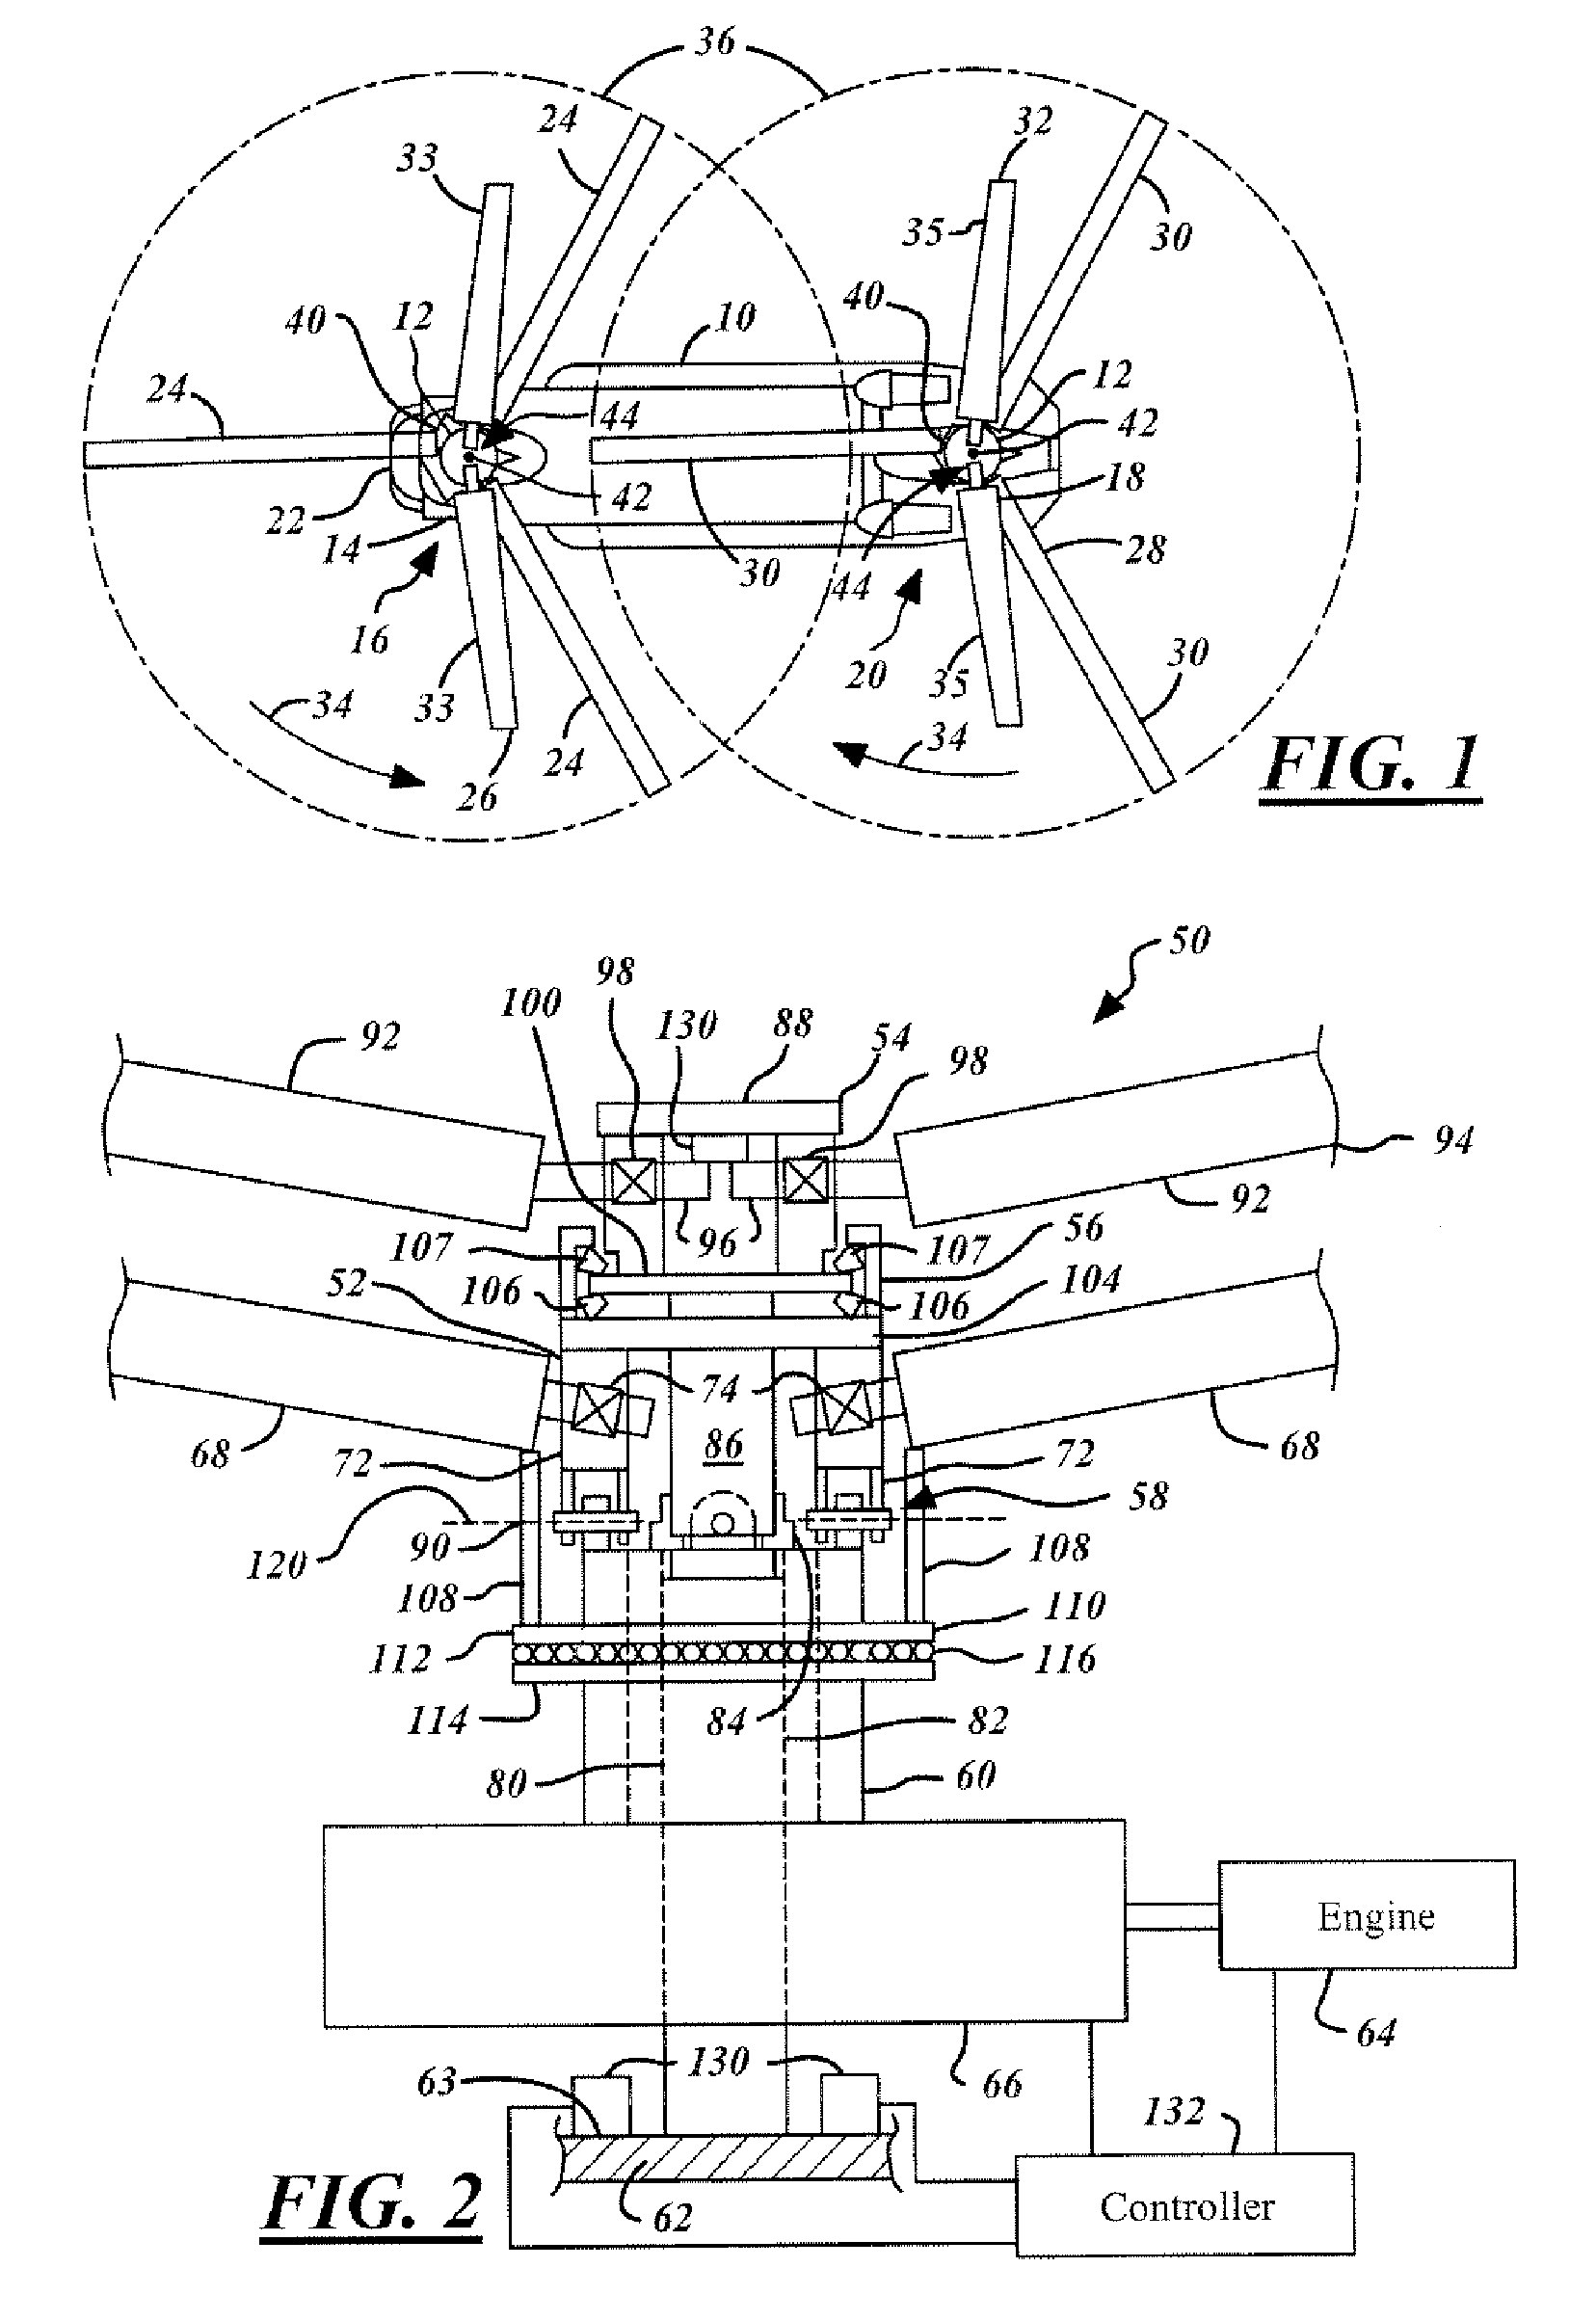 Unloaded lift offset rotor system for a helicopter